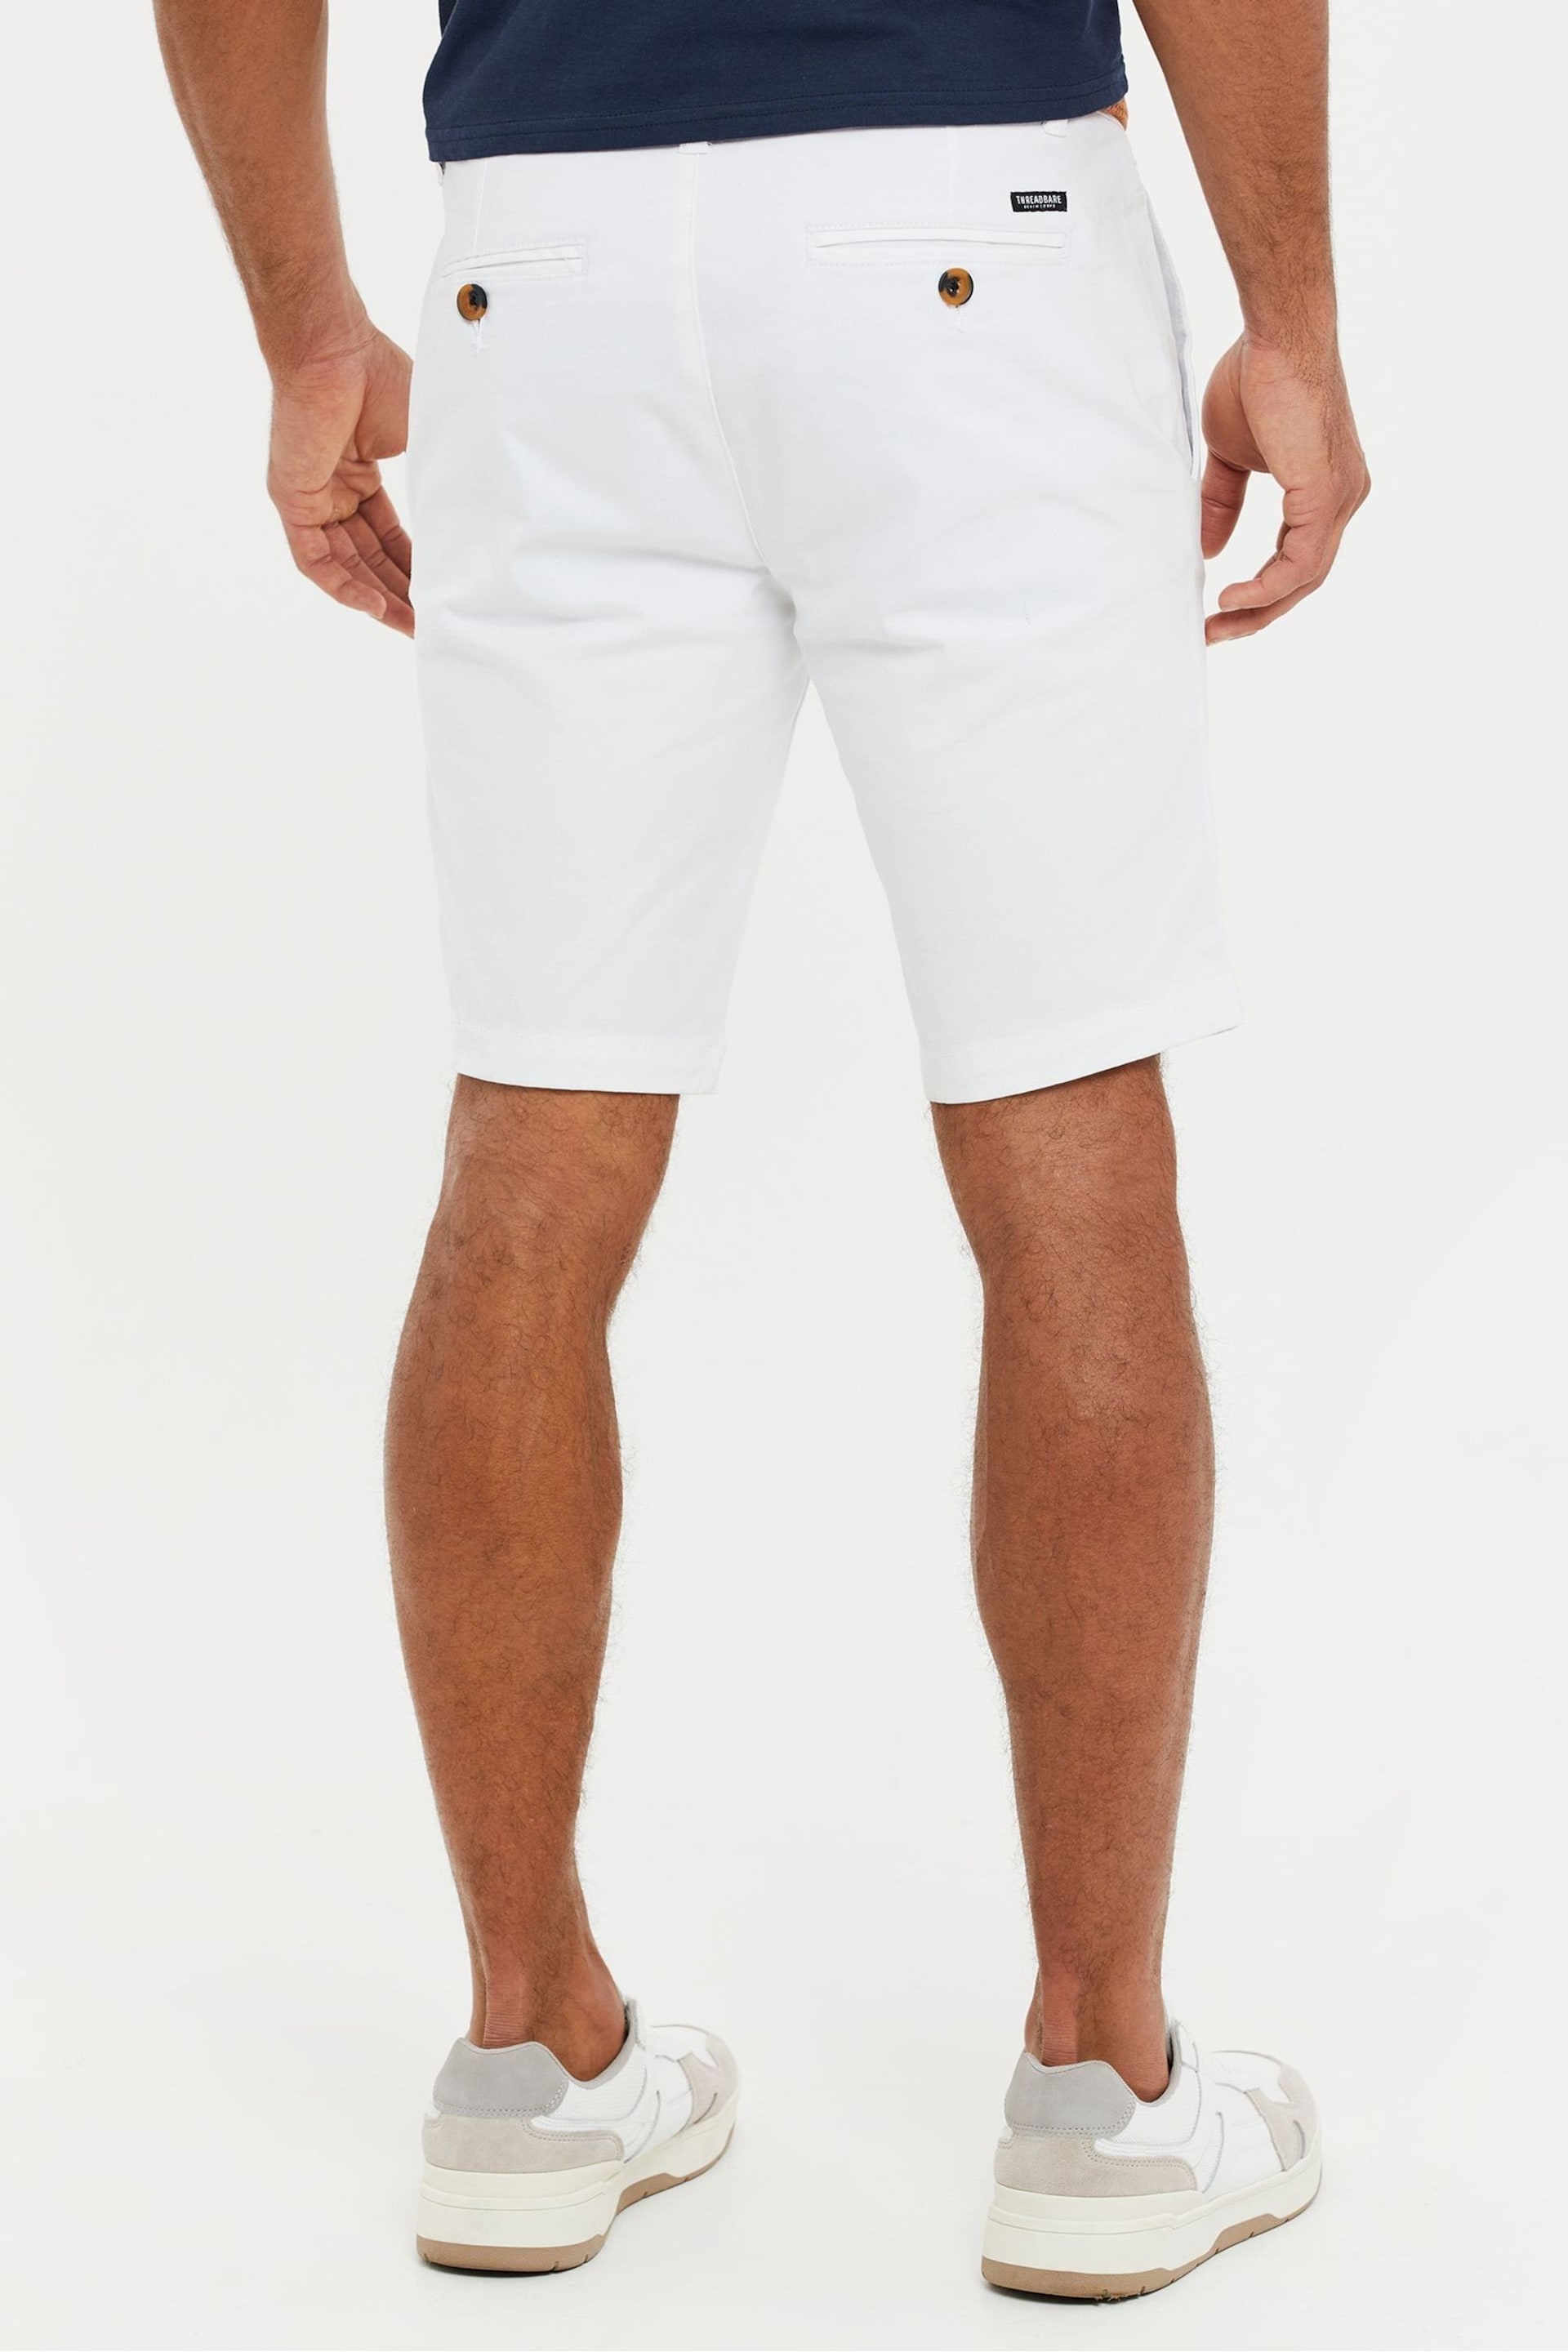 Threadbare White Cotton Stretch Turn-Up Chino Shorts with Woven Belt - Image 2 of 3